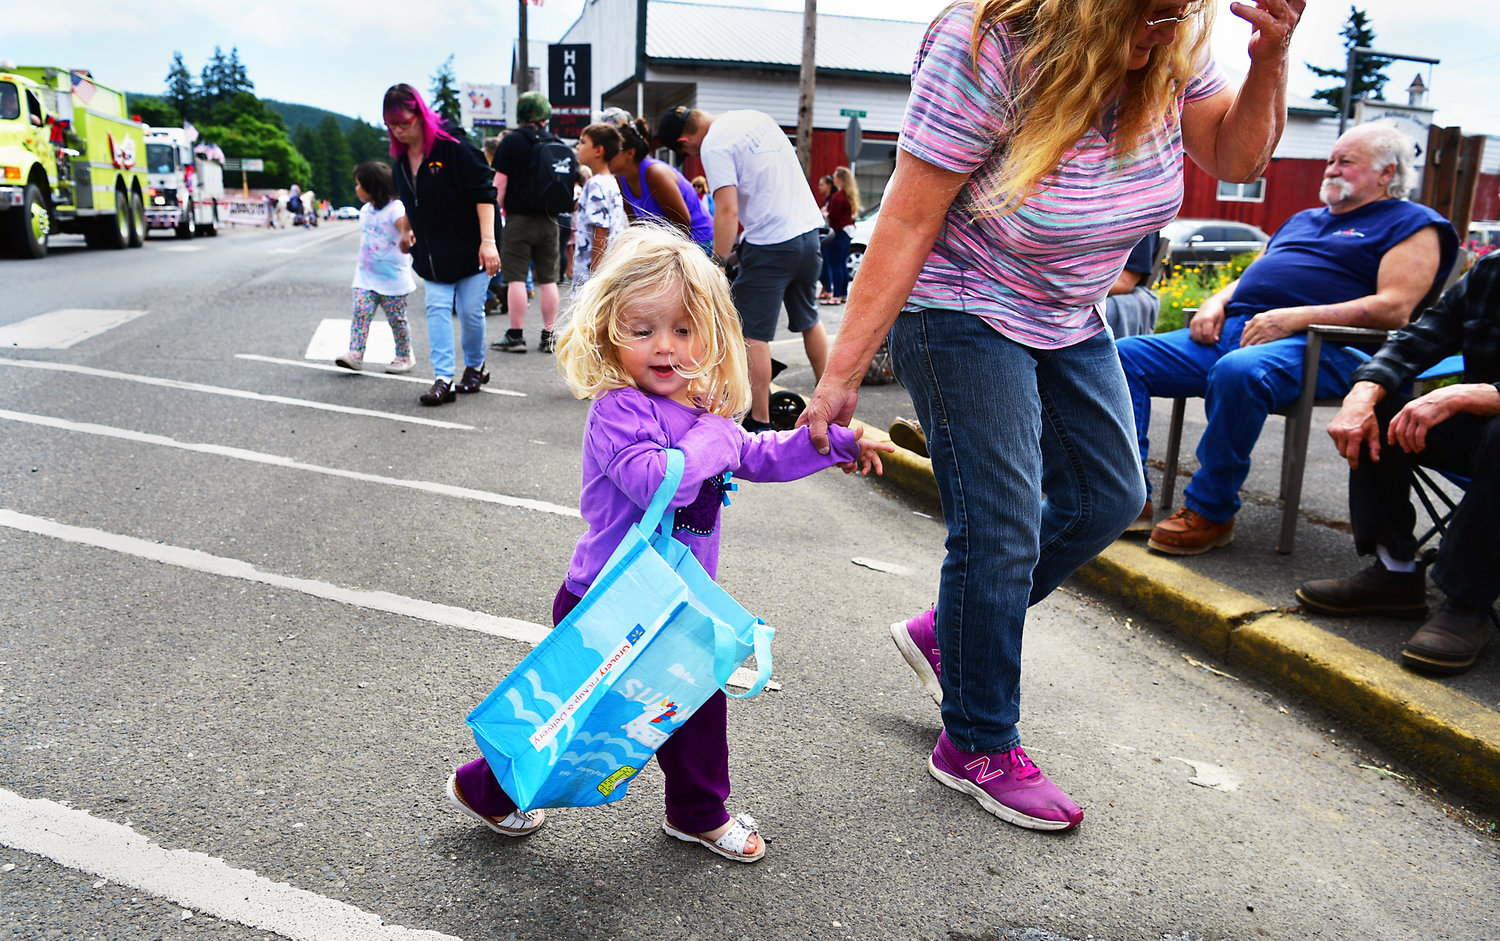 Tenino resident Laiya Muxen, 2, had just grabbed some sweet goodies on the ground before her great-grandmother Nancy Ware, 63, from Rochester, led her back to the curb during Oakville’s Independence Day parade on Saturday, July 3.